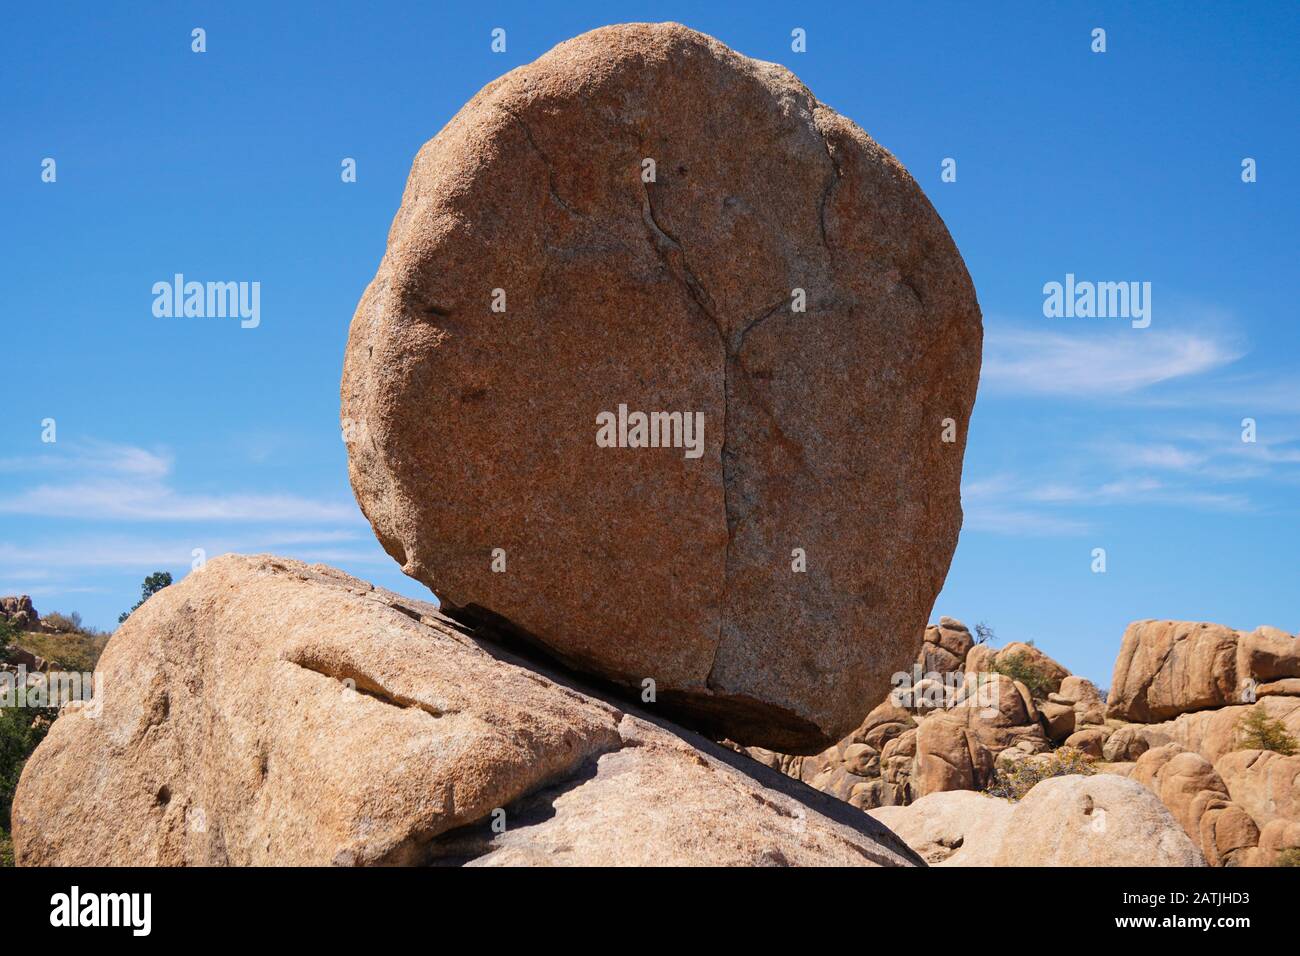 A Large granite boulder defying gravity clings precariously to the rocks below. Stock Photo